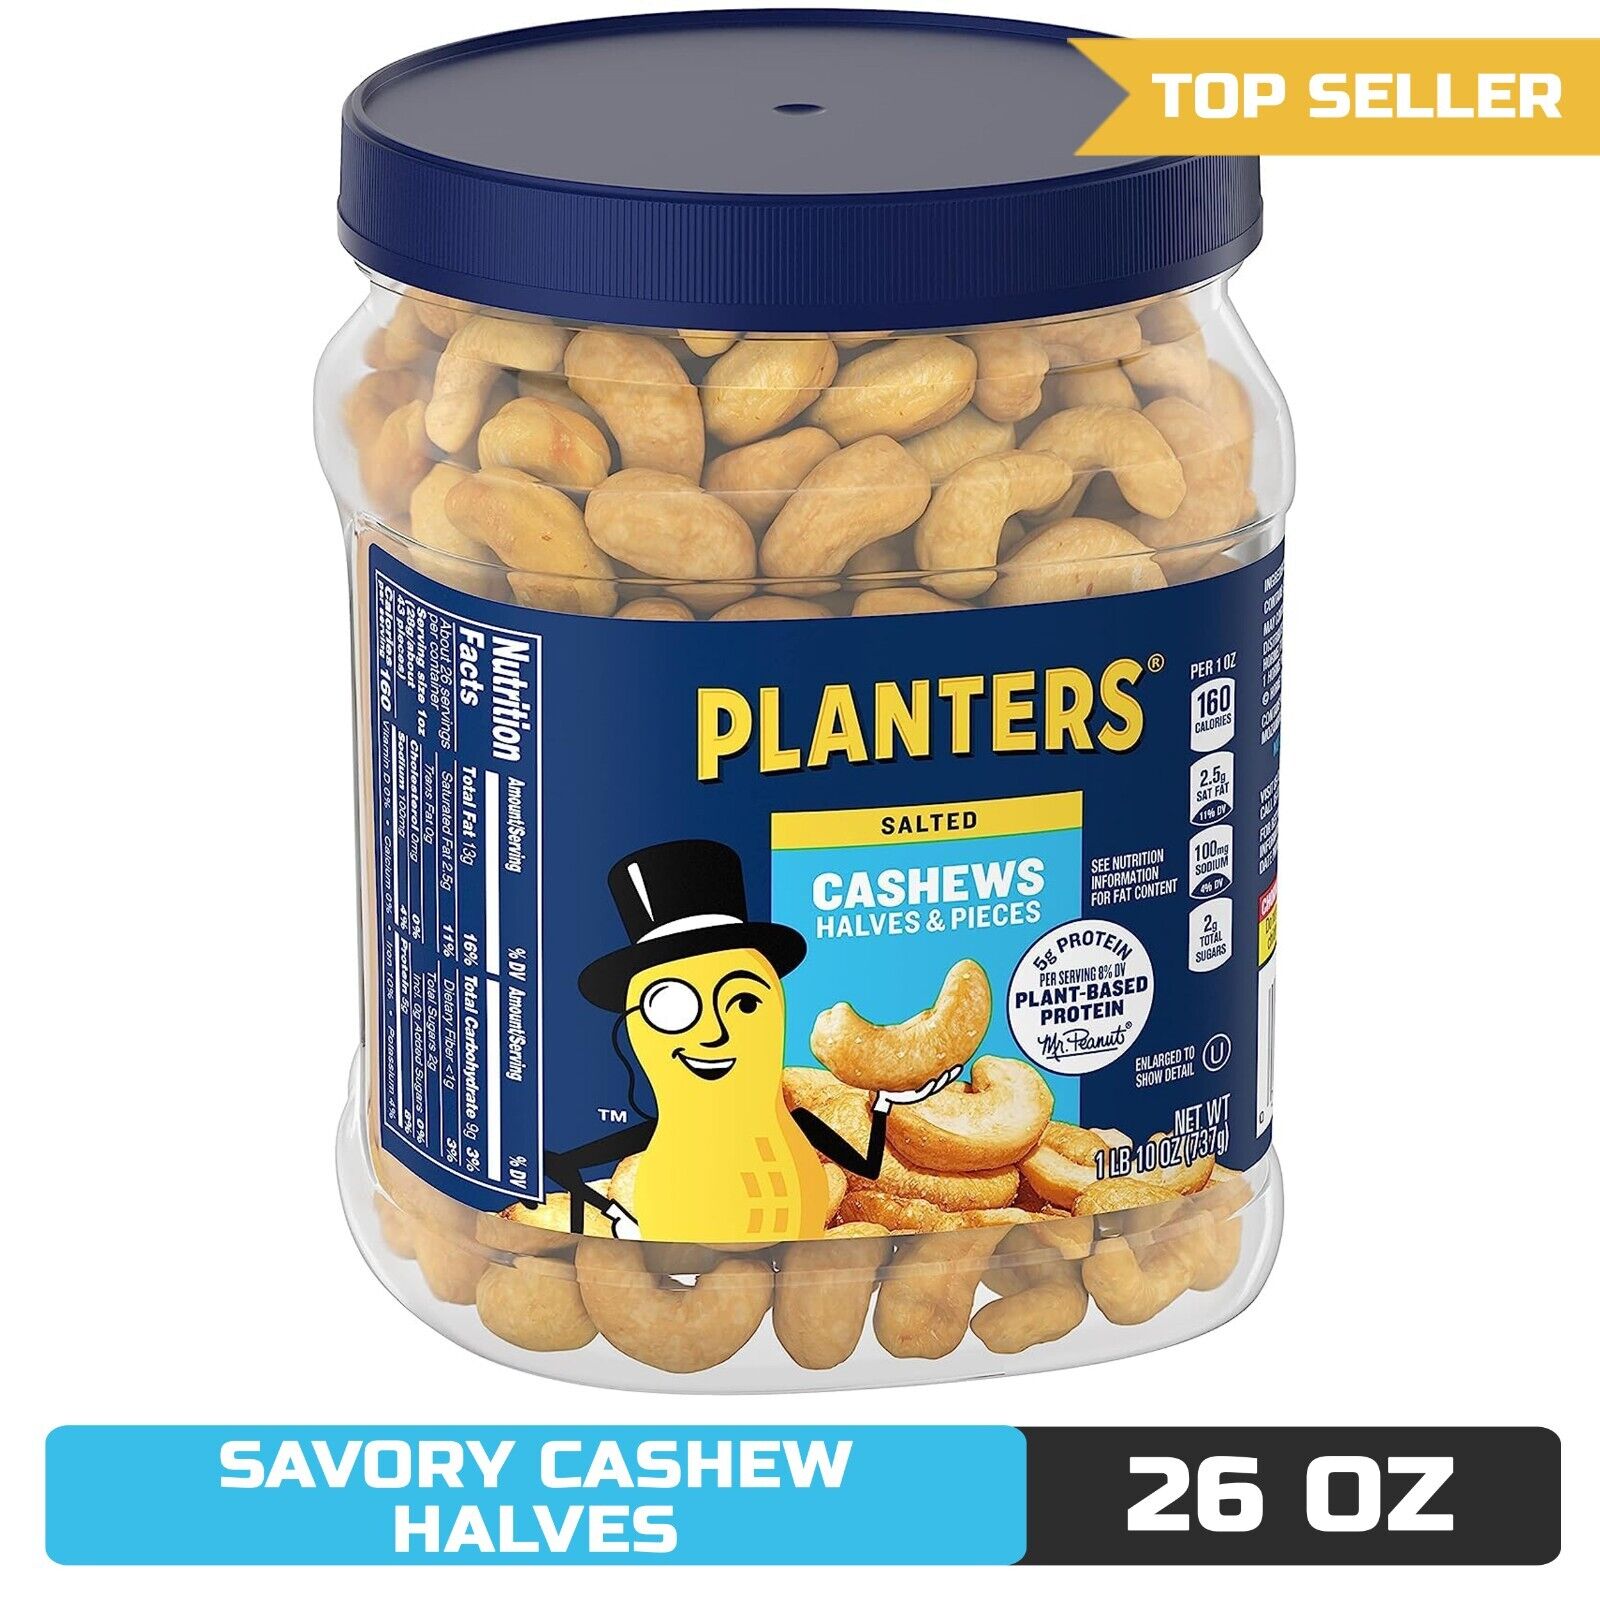 PLANTERS Salted Cashew Halves & Pieces - Snack Satisfaction, 26 oz Canister